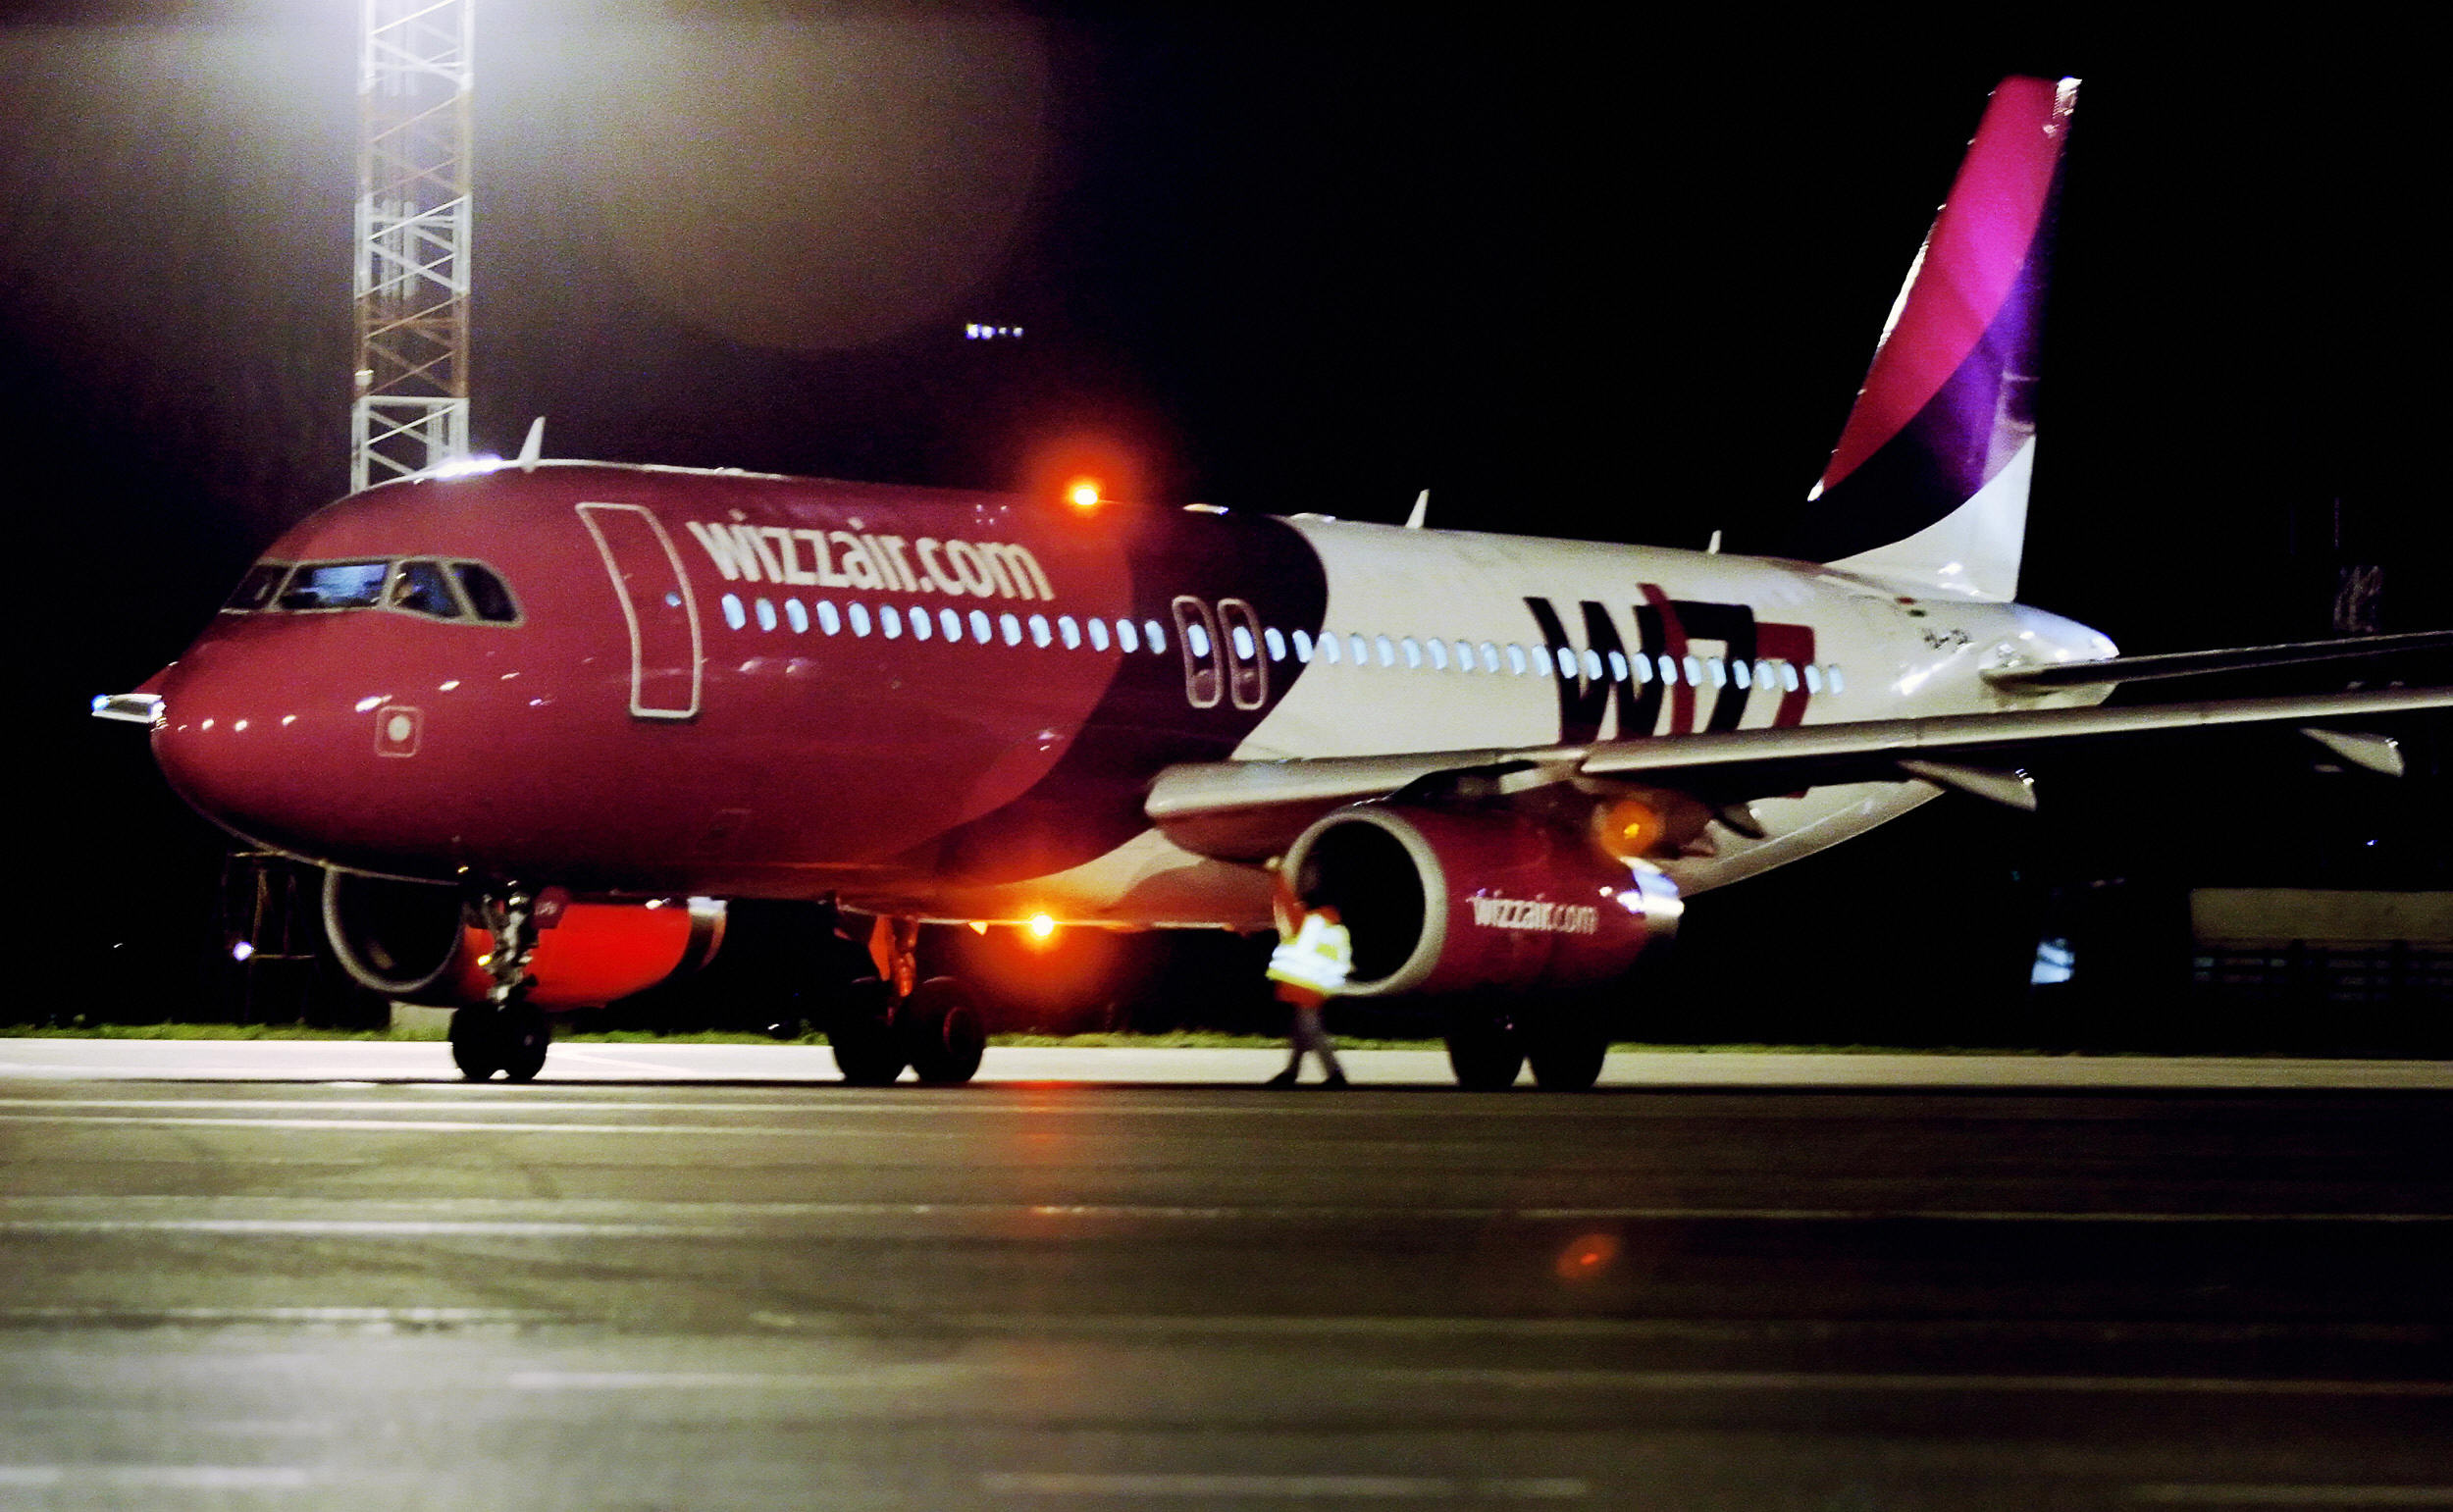 Wizz Air agrees to launch spin-off airline out of Abu Dhabi